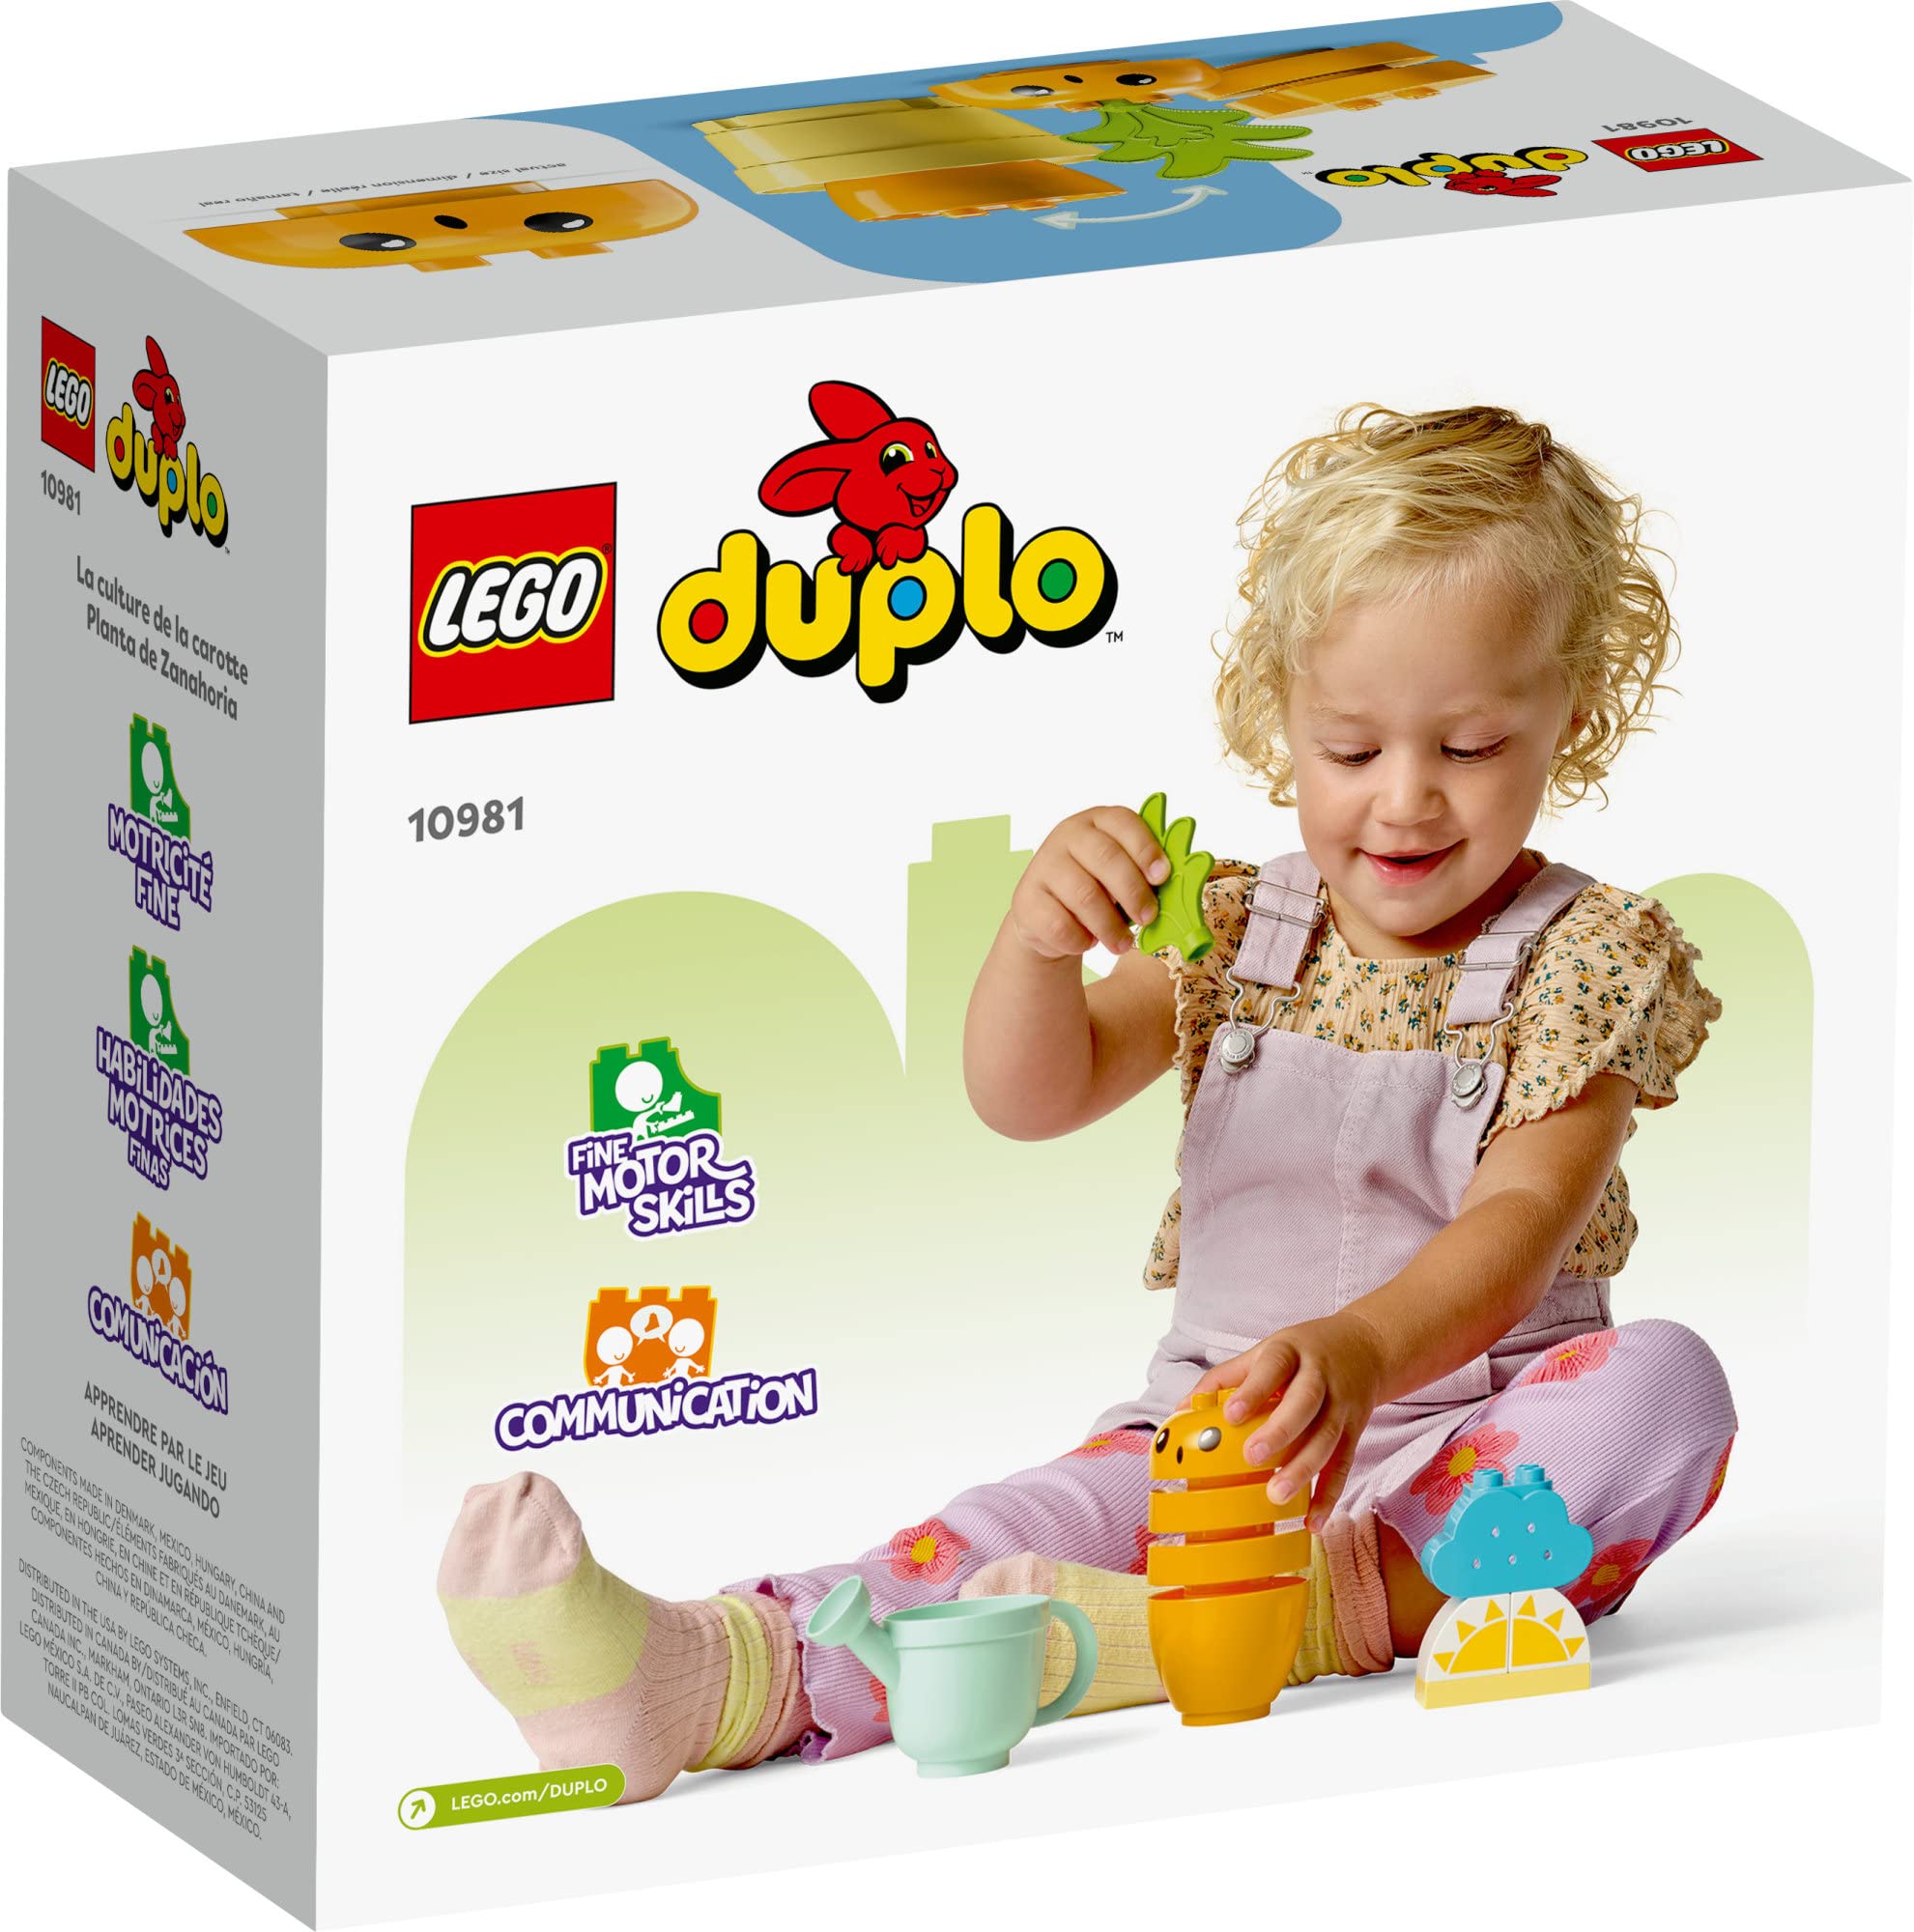 LEGO DUPLO My First Growing Carrot 10981, Stacking Toys for Babies 1.5+ Years Old with 4 Vegetable Bricks, Learning Educational Toy for Toddlers